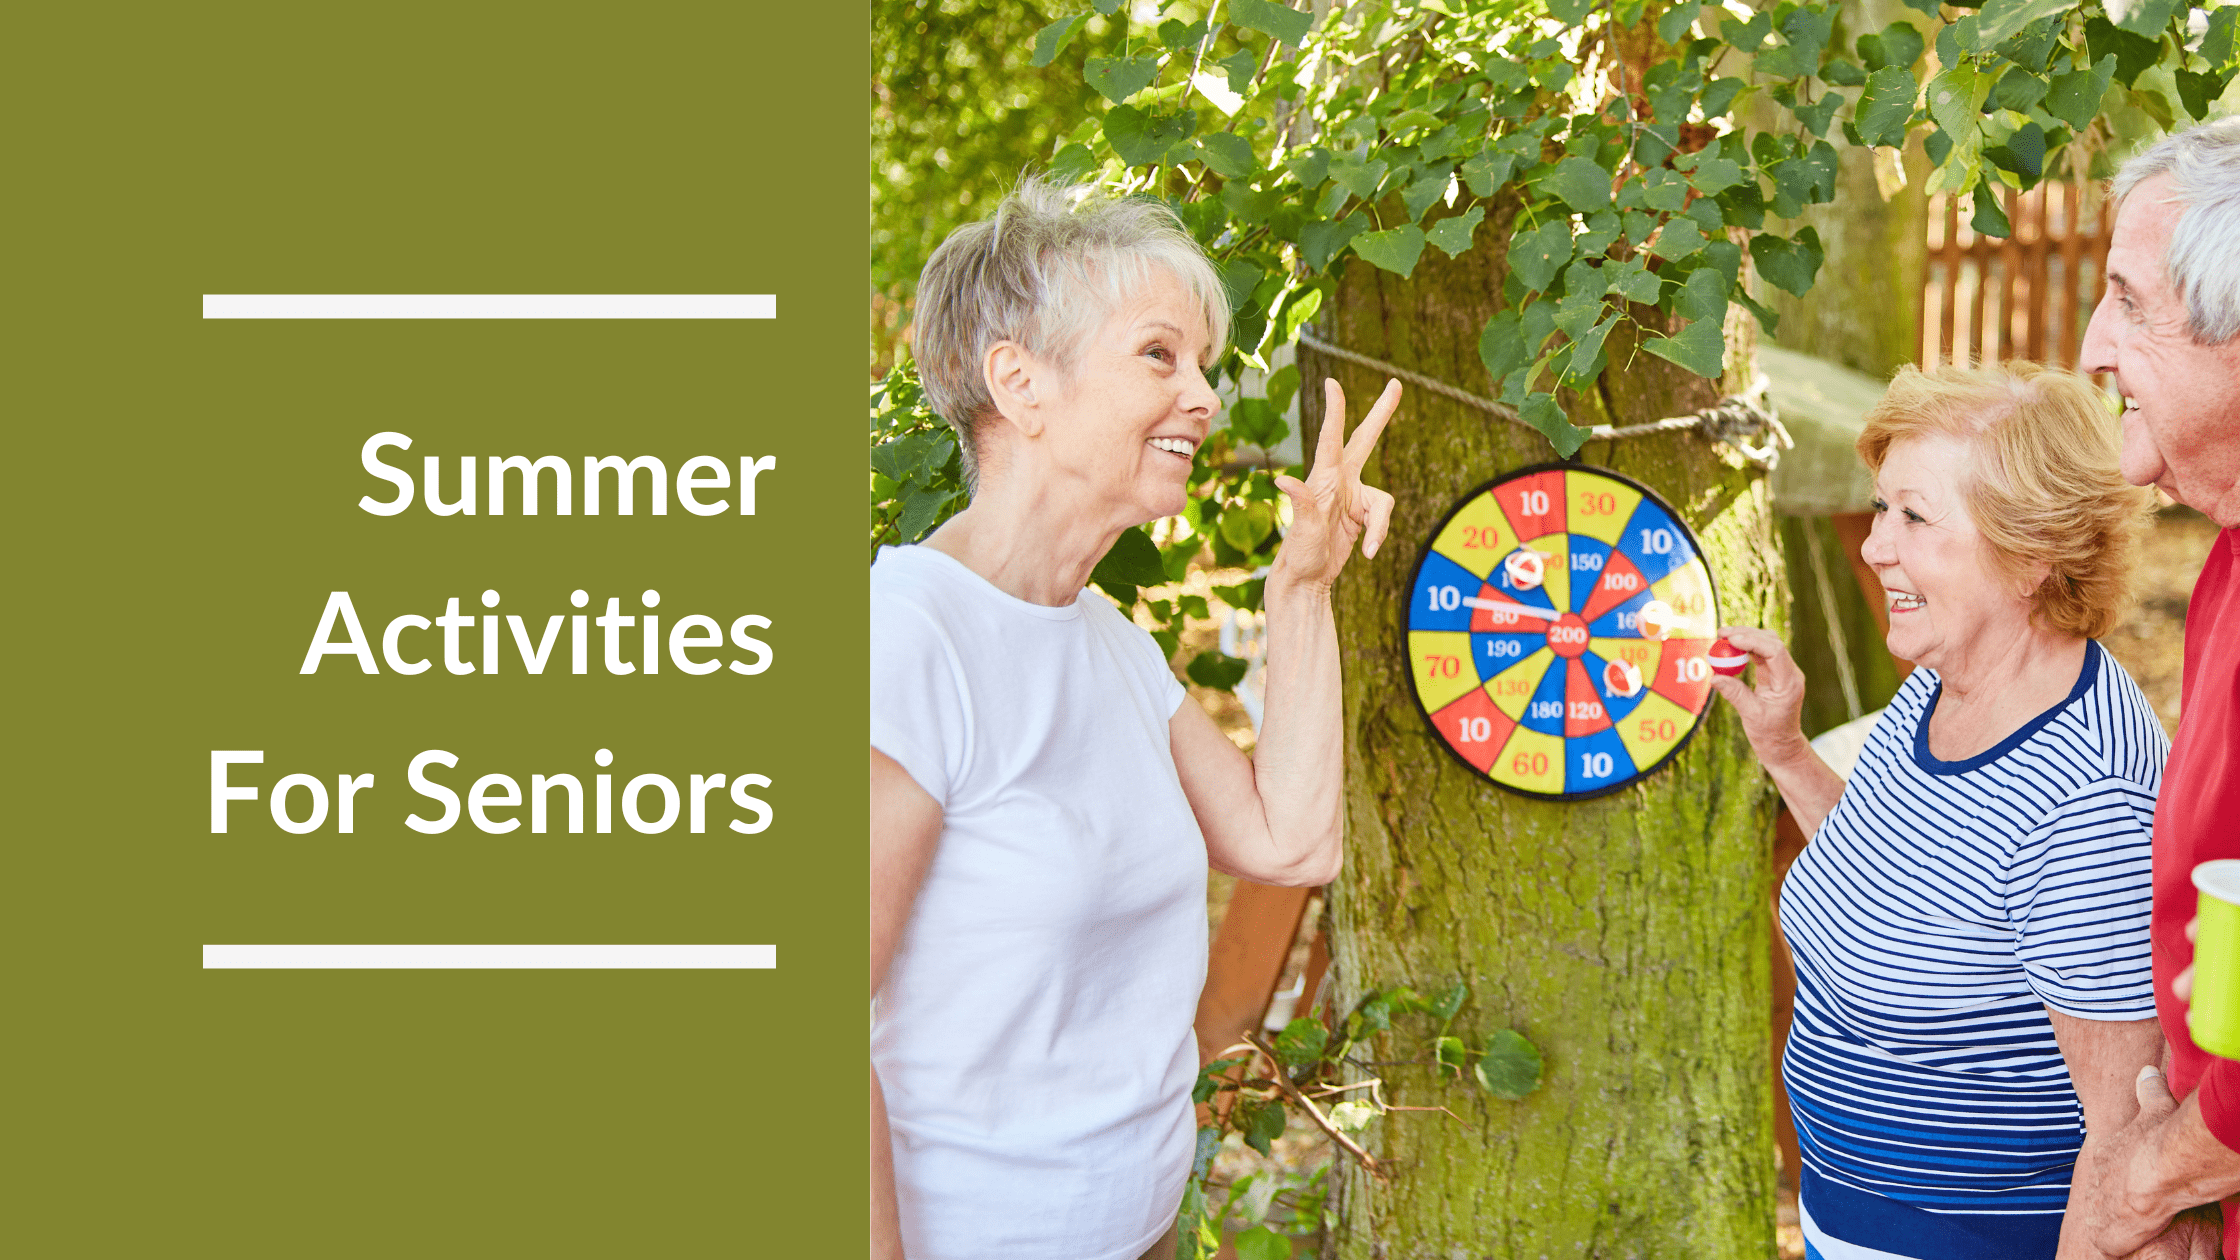 Summer Activities For Seniors Featured Image